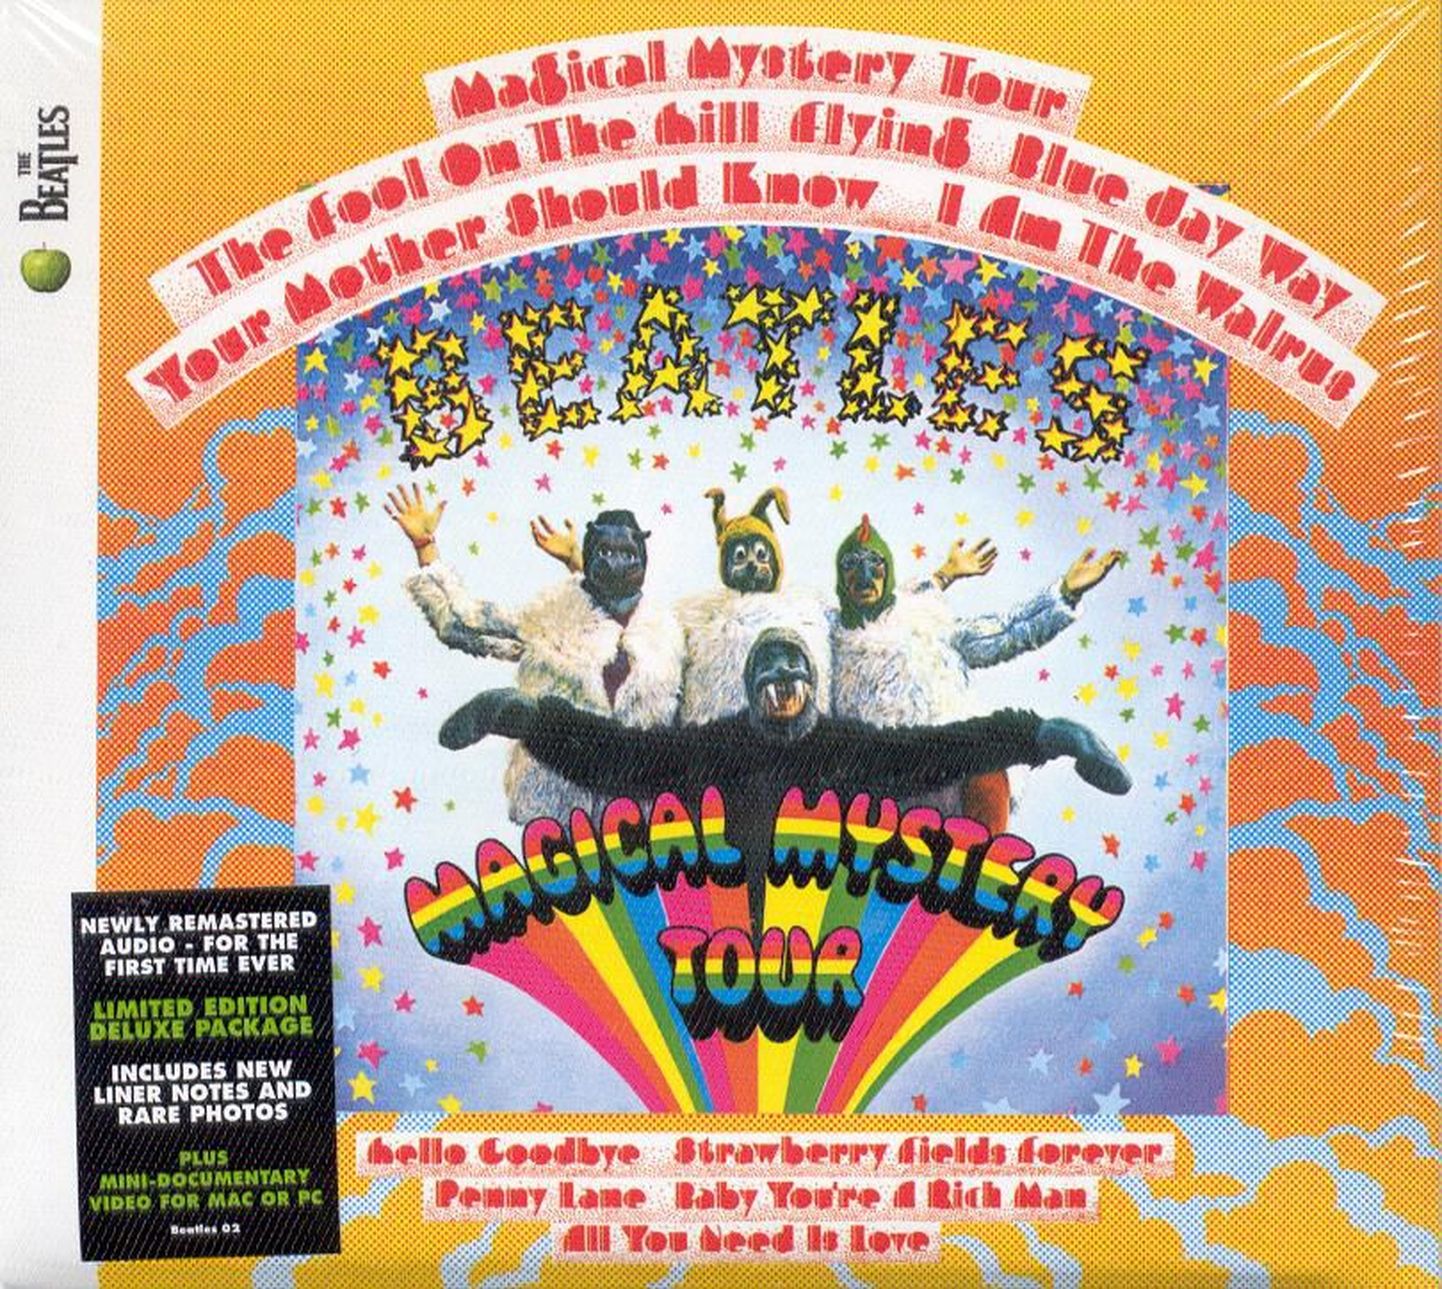 The Beatles “Magical Mystery Tour”.